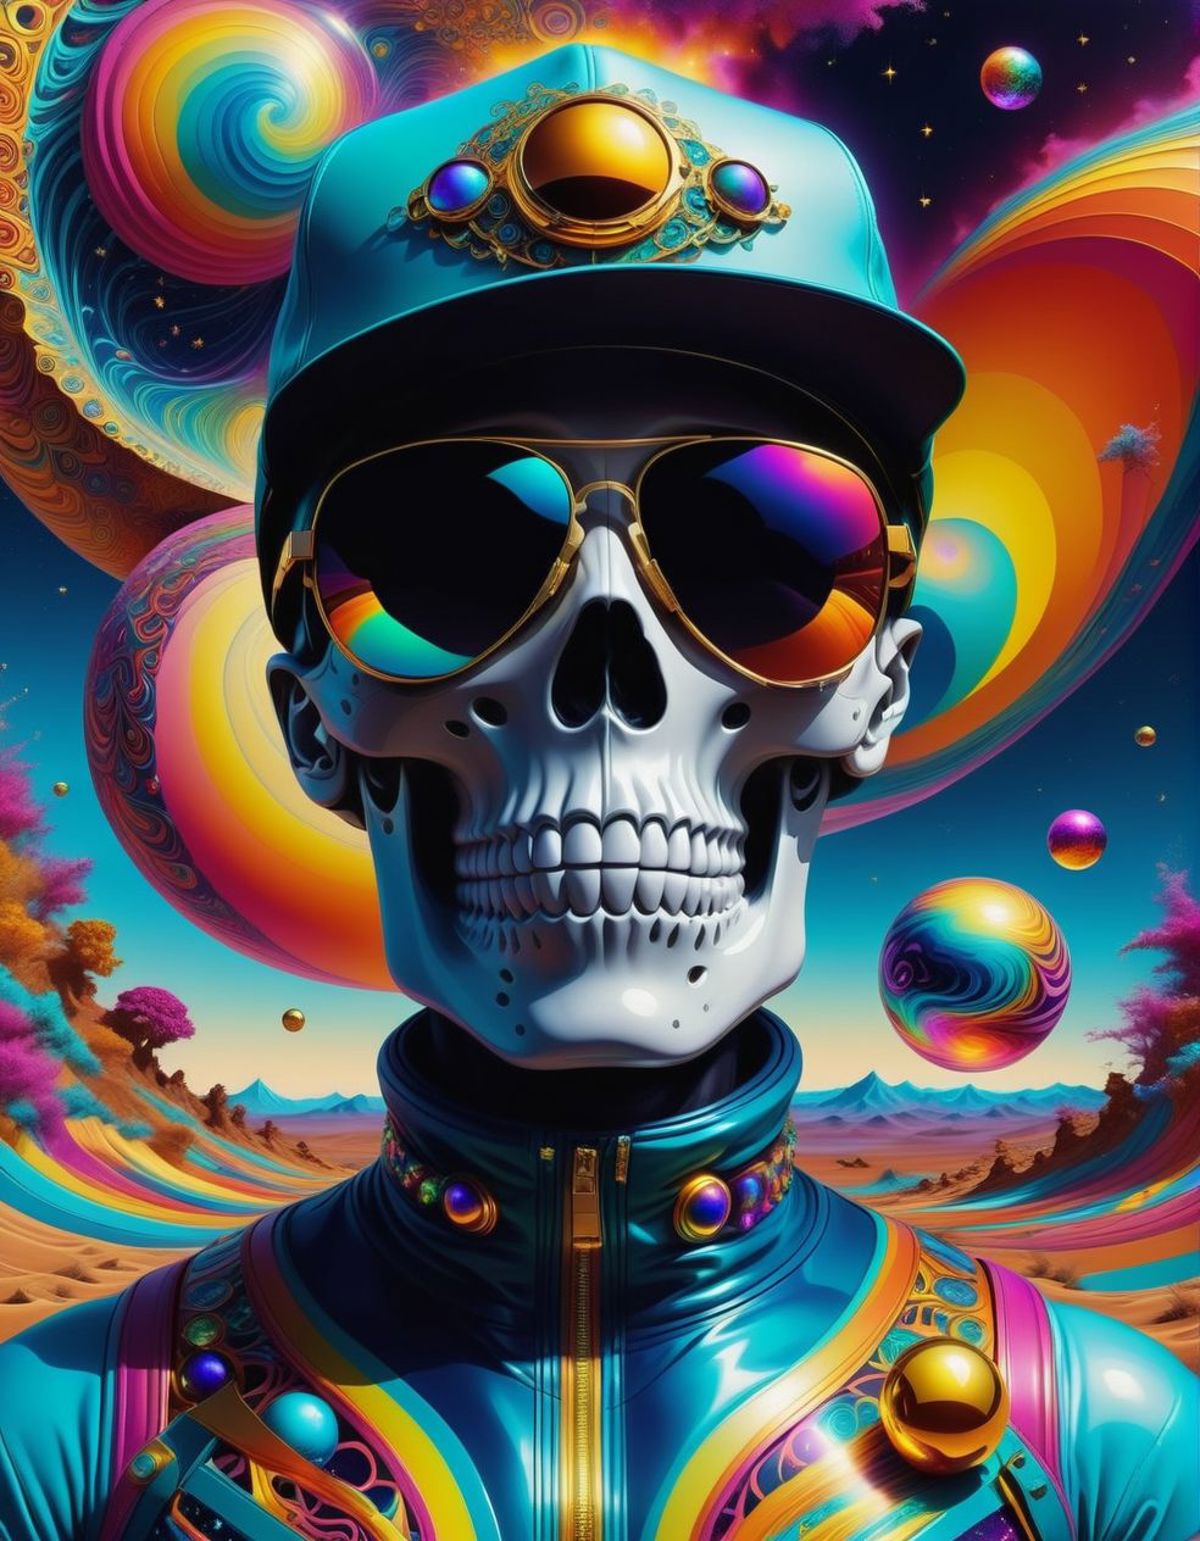 A skeleton wearing a blue hat and sunglasses, surrounded by colorful orbs.